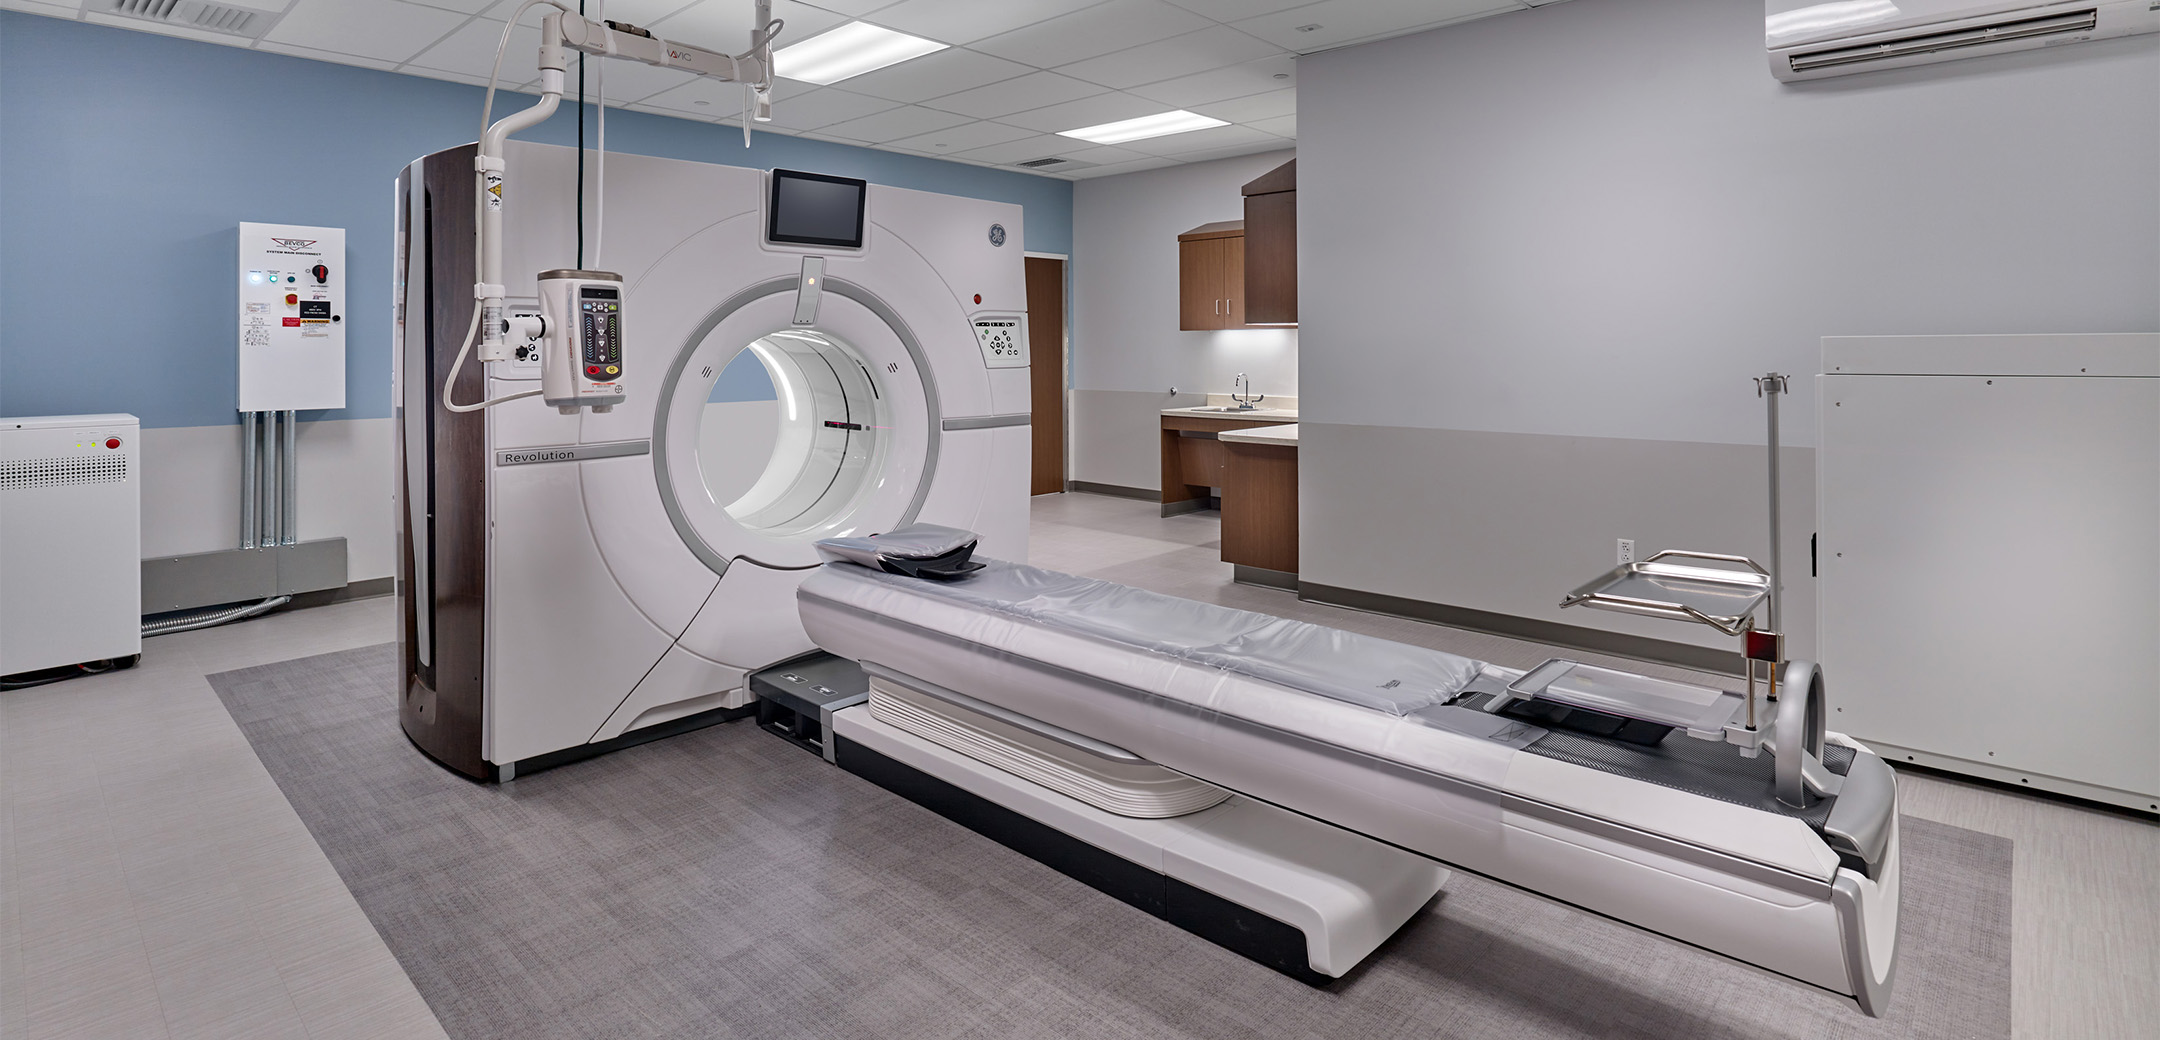 The interior of St. Luke's Anderson Campus featuring a white MRI machine in the center of the room